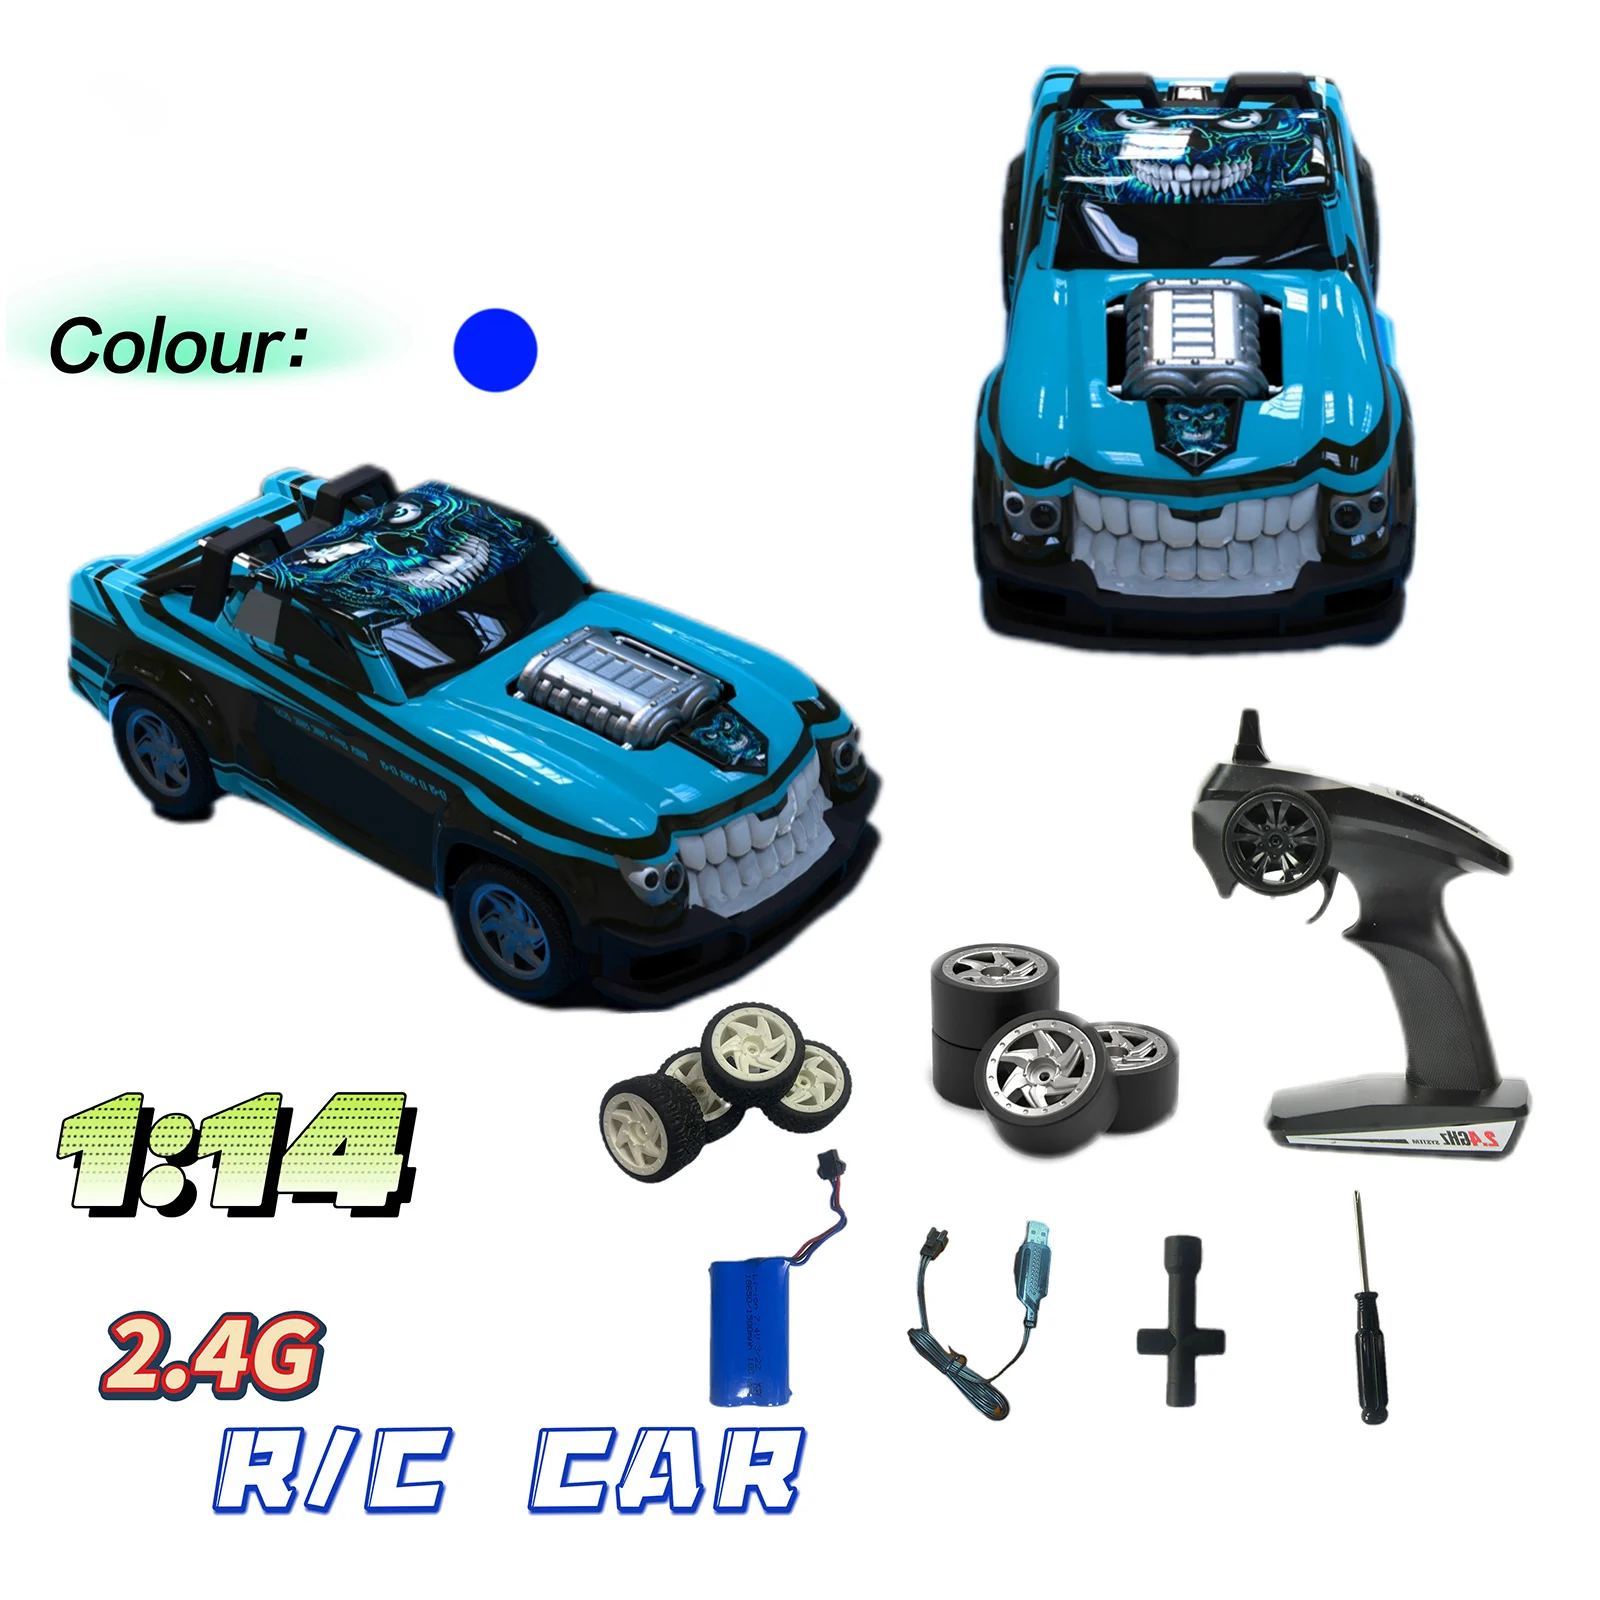 RC Car Off Road 1:14 4WD Remote Control High Speed Car 40 Km/s Drift Vehicle Monster Truck Large Boy Child Toys for Kids Gifts enlarge